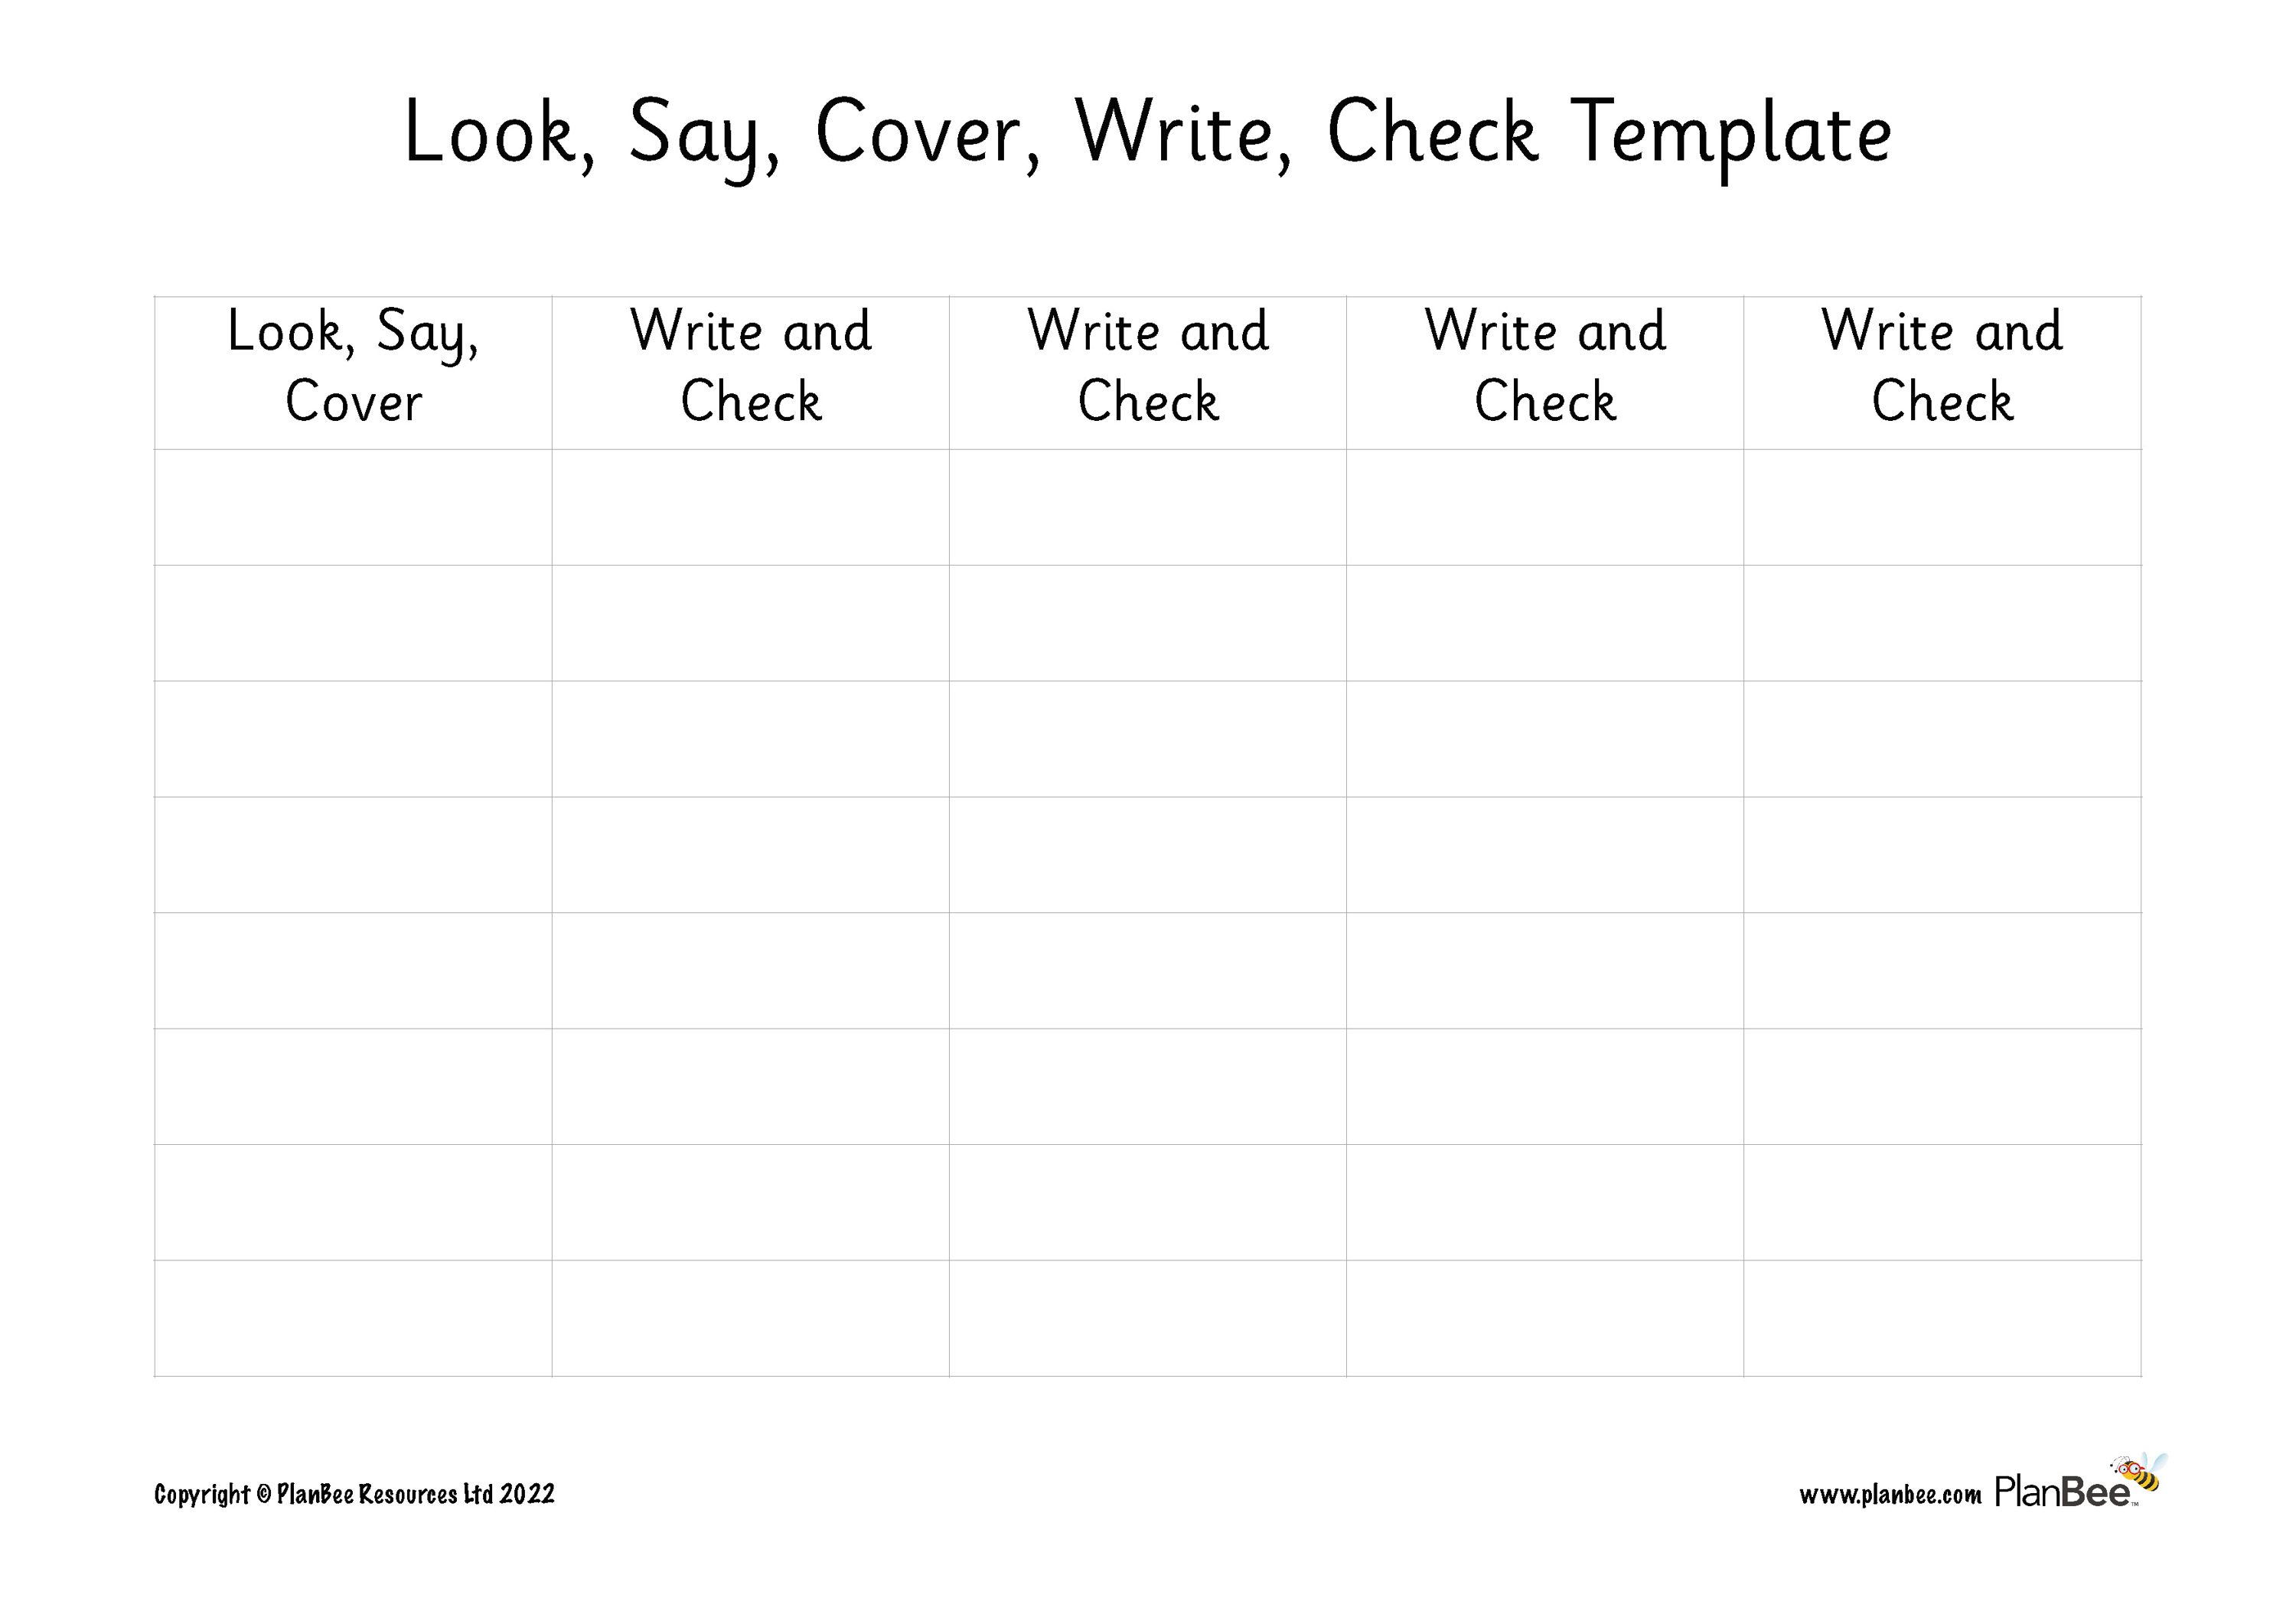 Look, Say, Cover, Write, Check Template